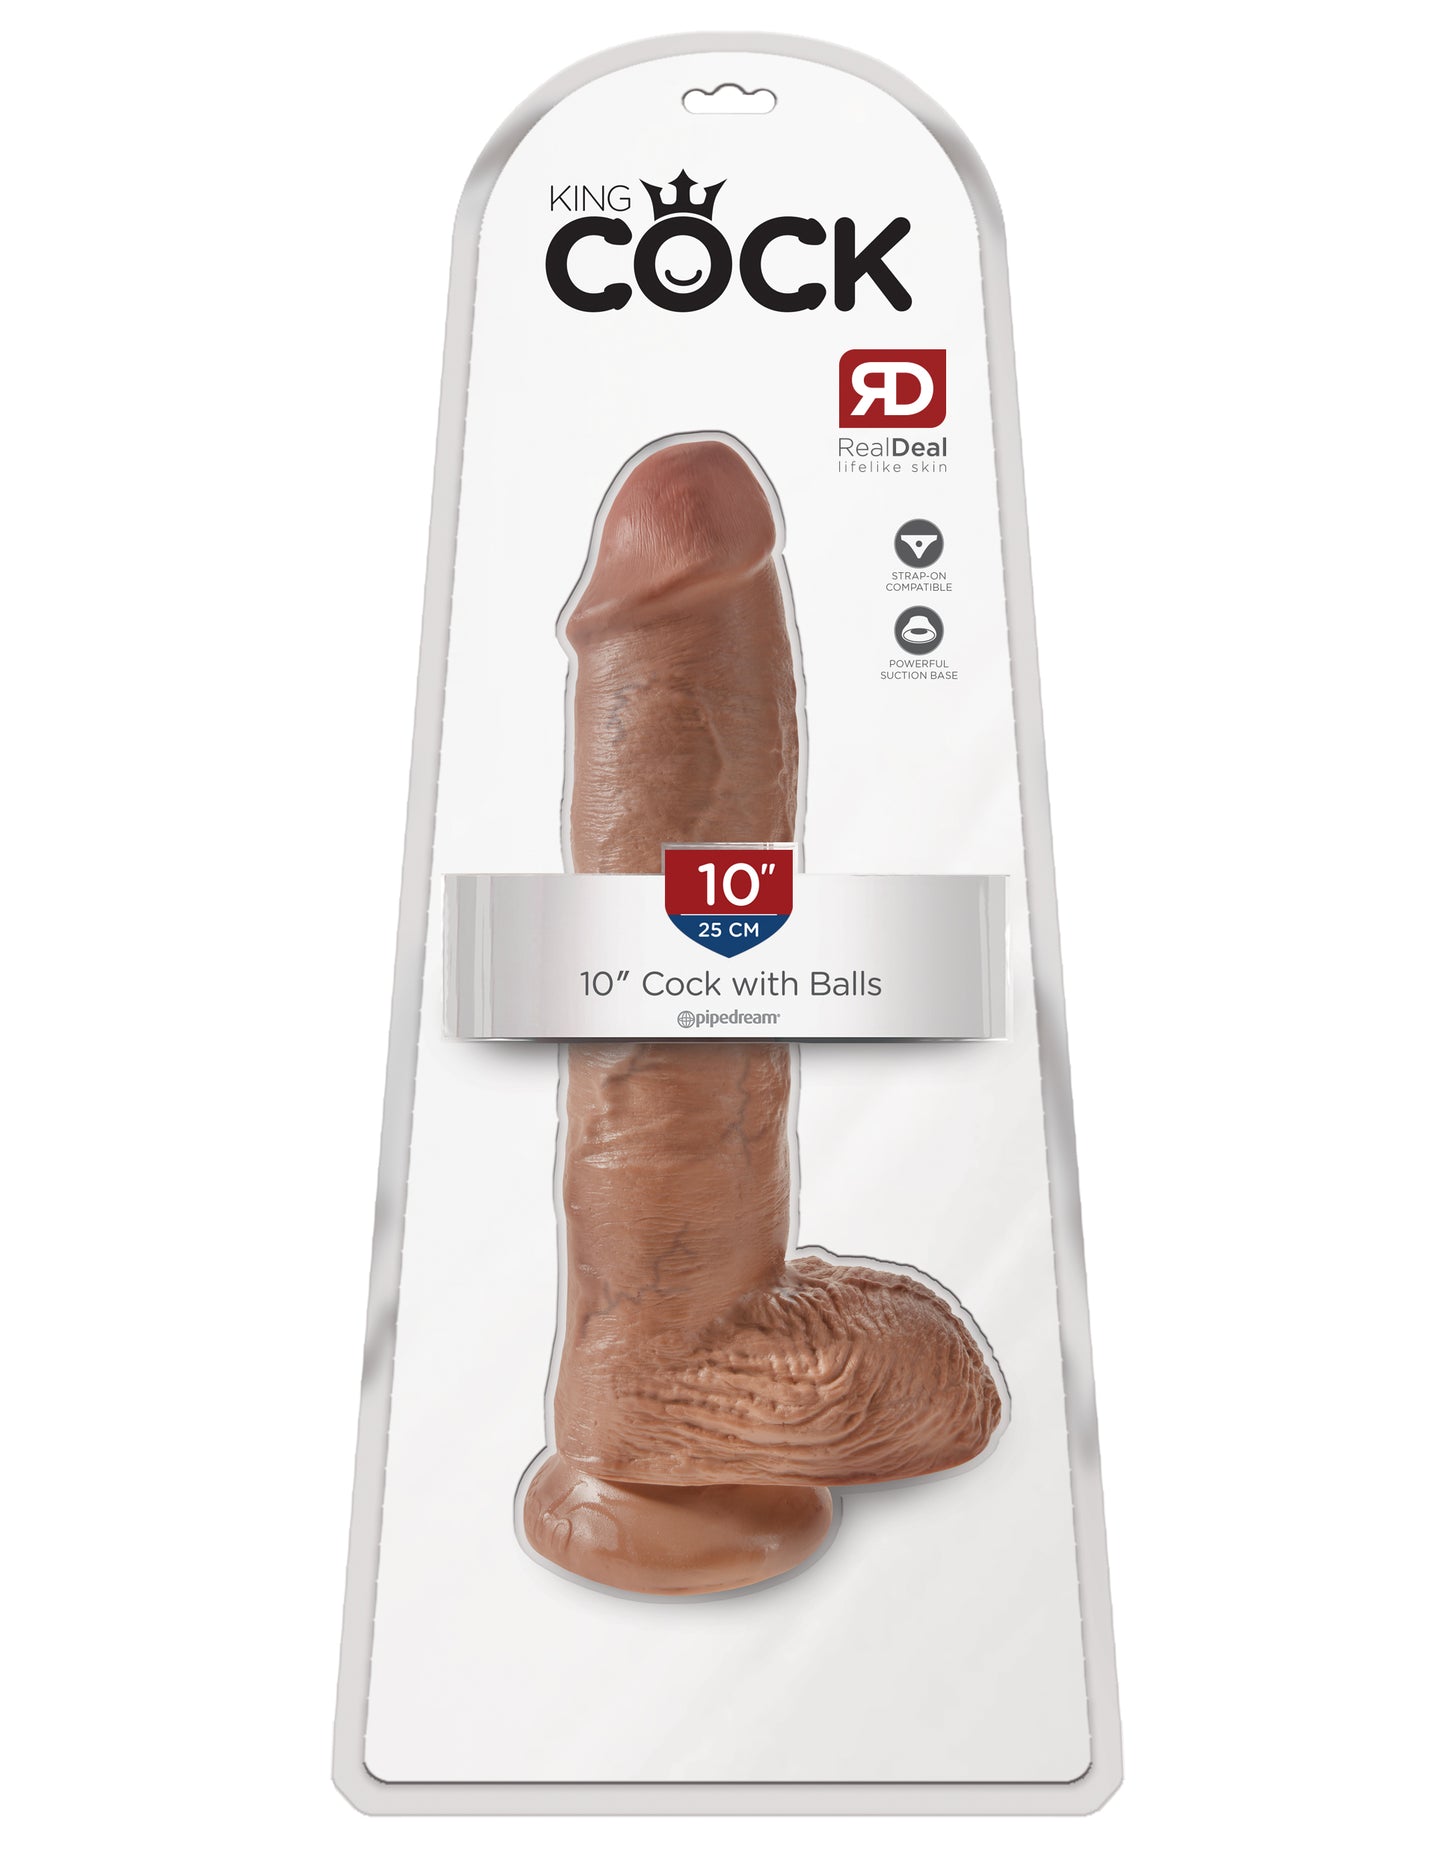 King Cock 10" with Balls